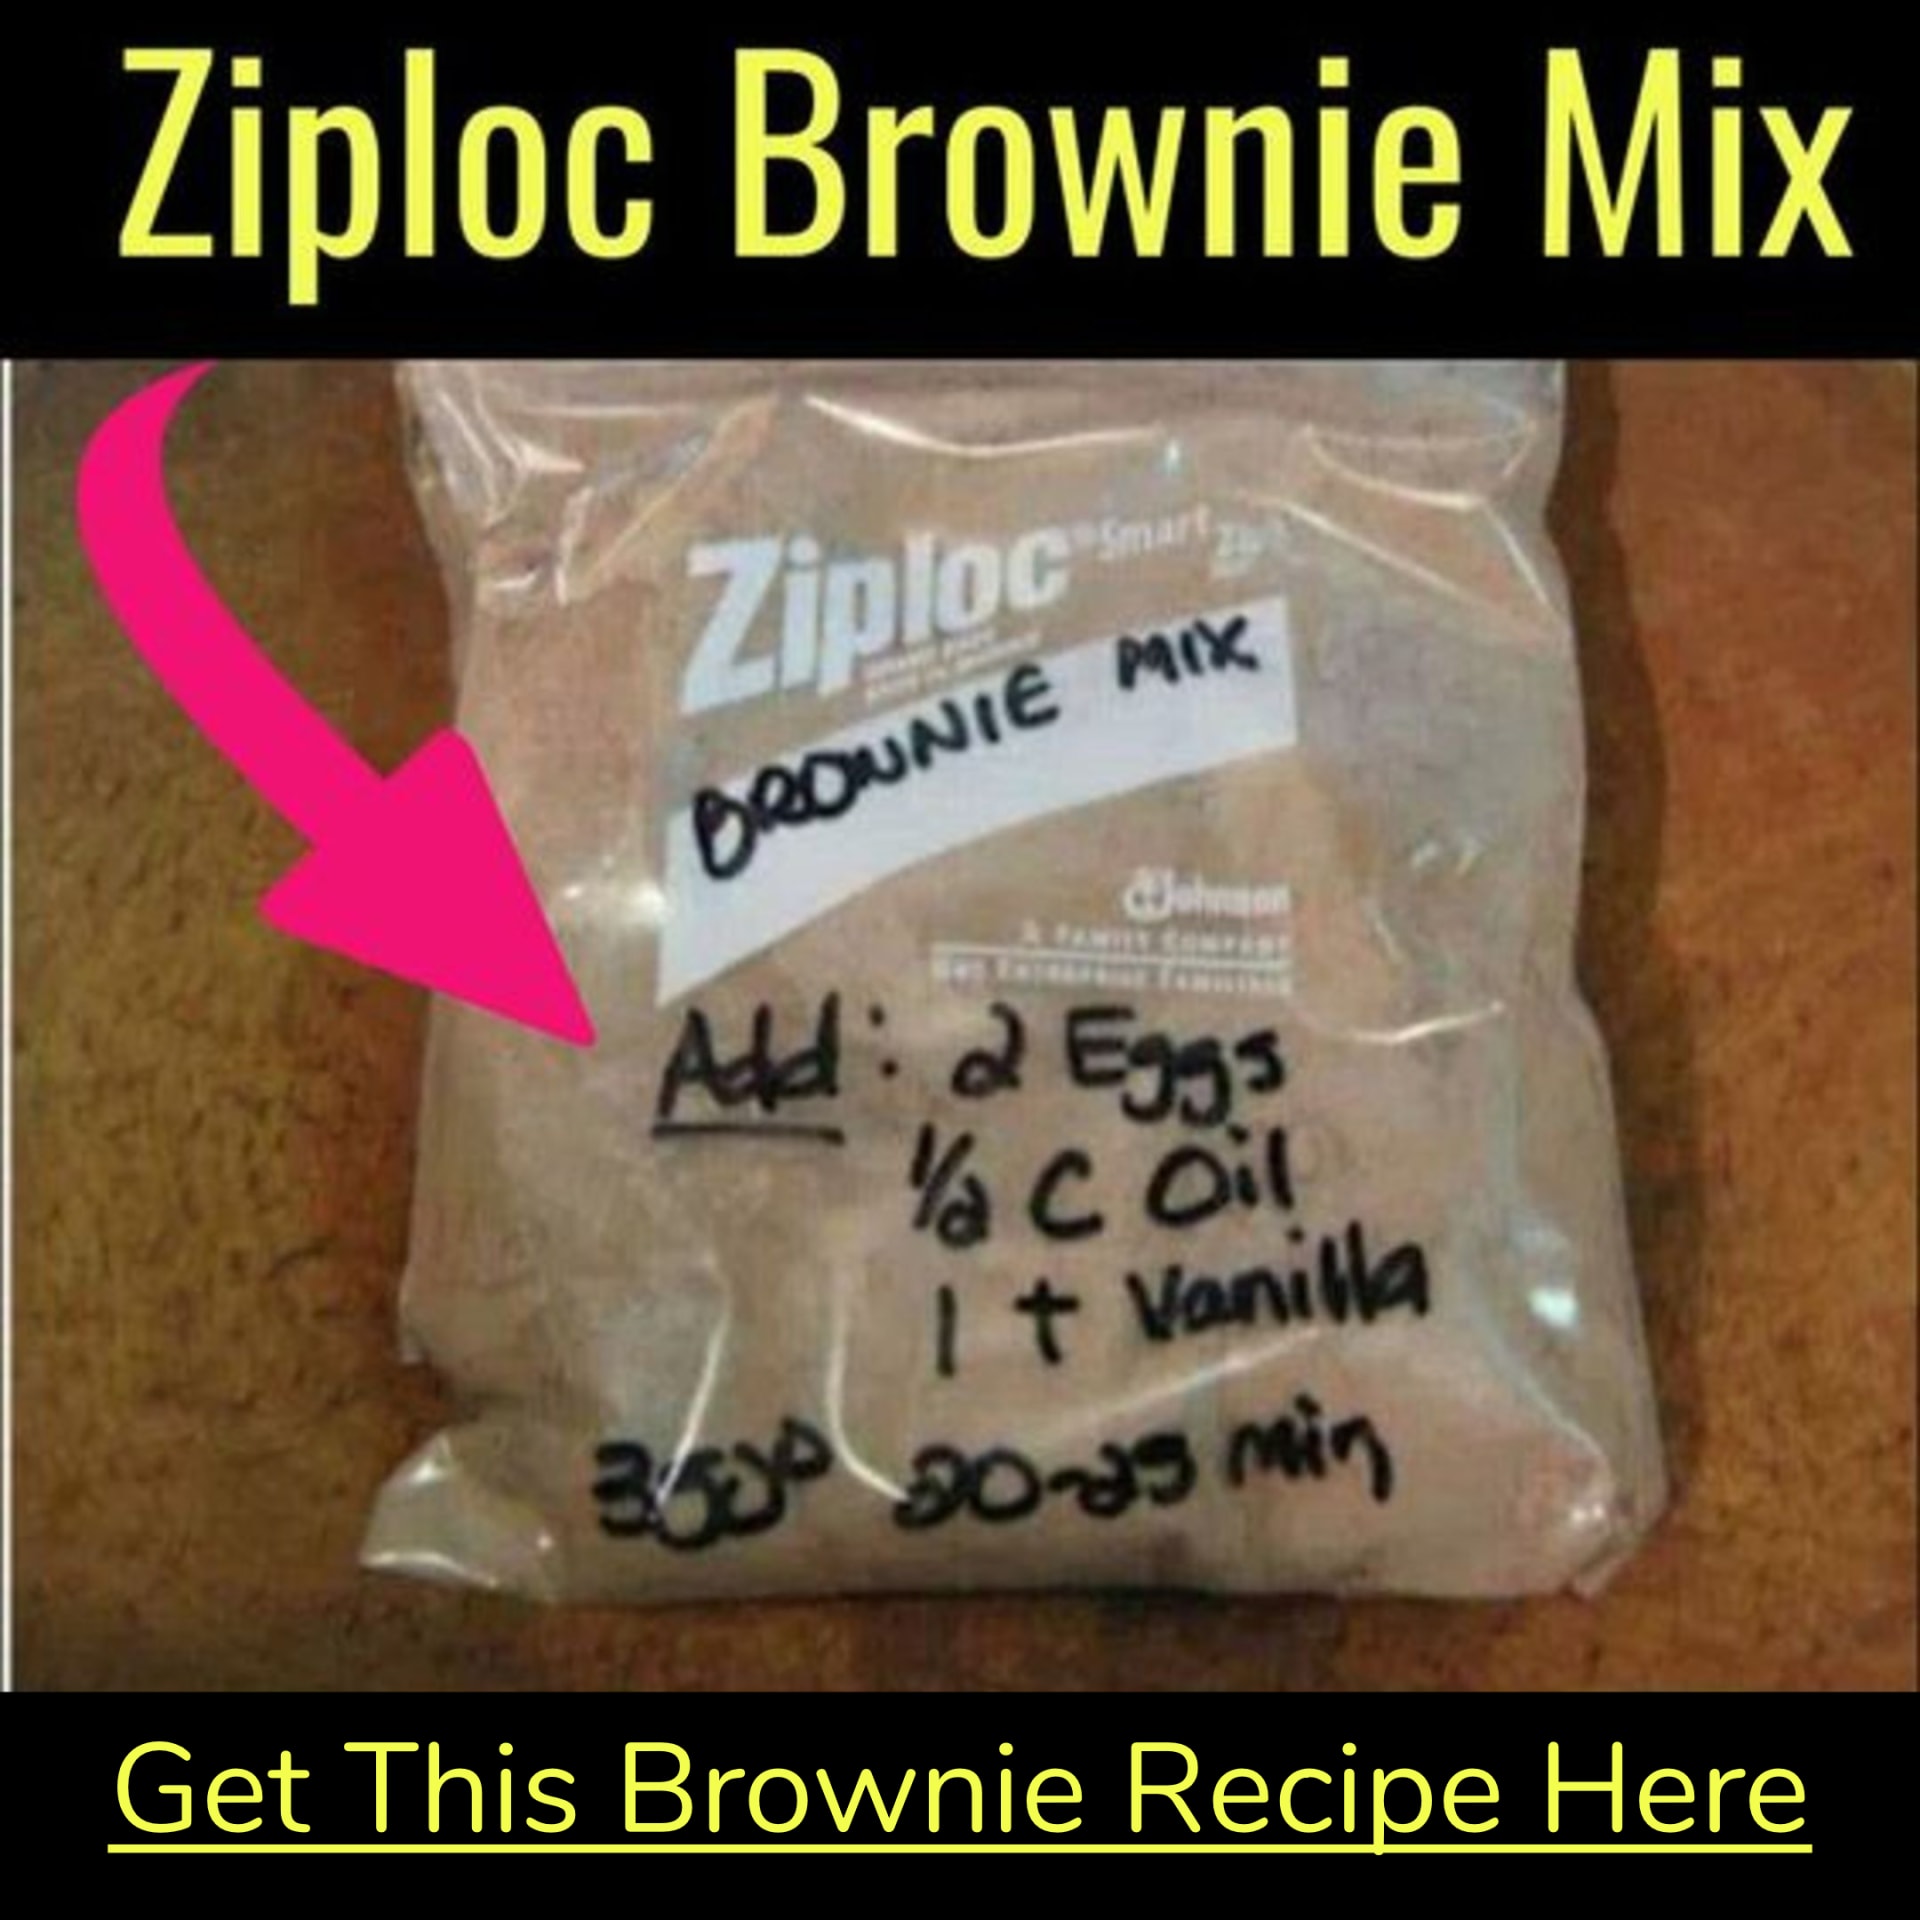 simple desserts for a crowd - easy brownie recipes for homemade brownie mix and more simple desserts